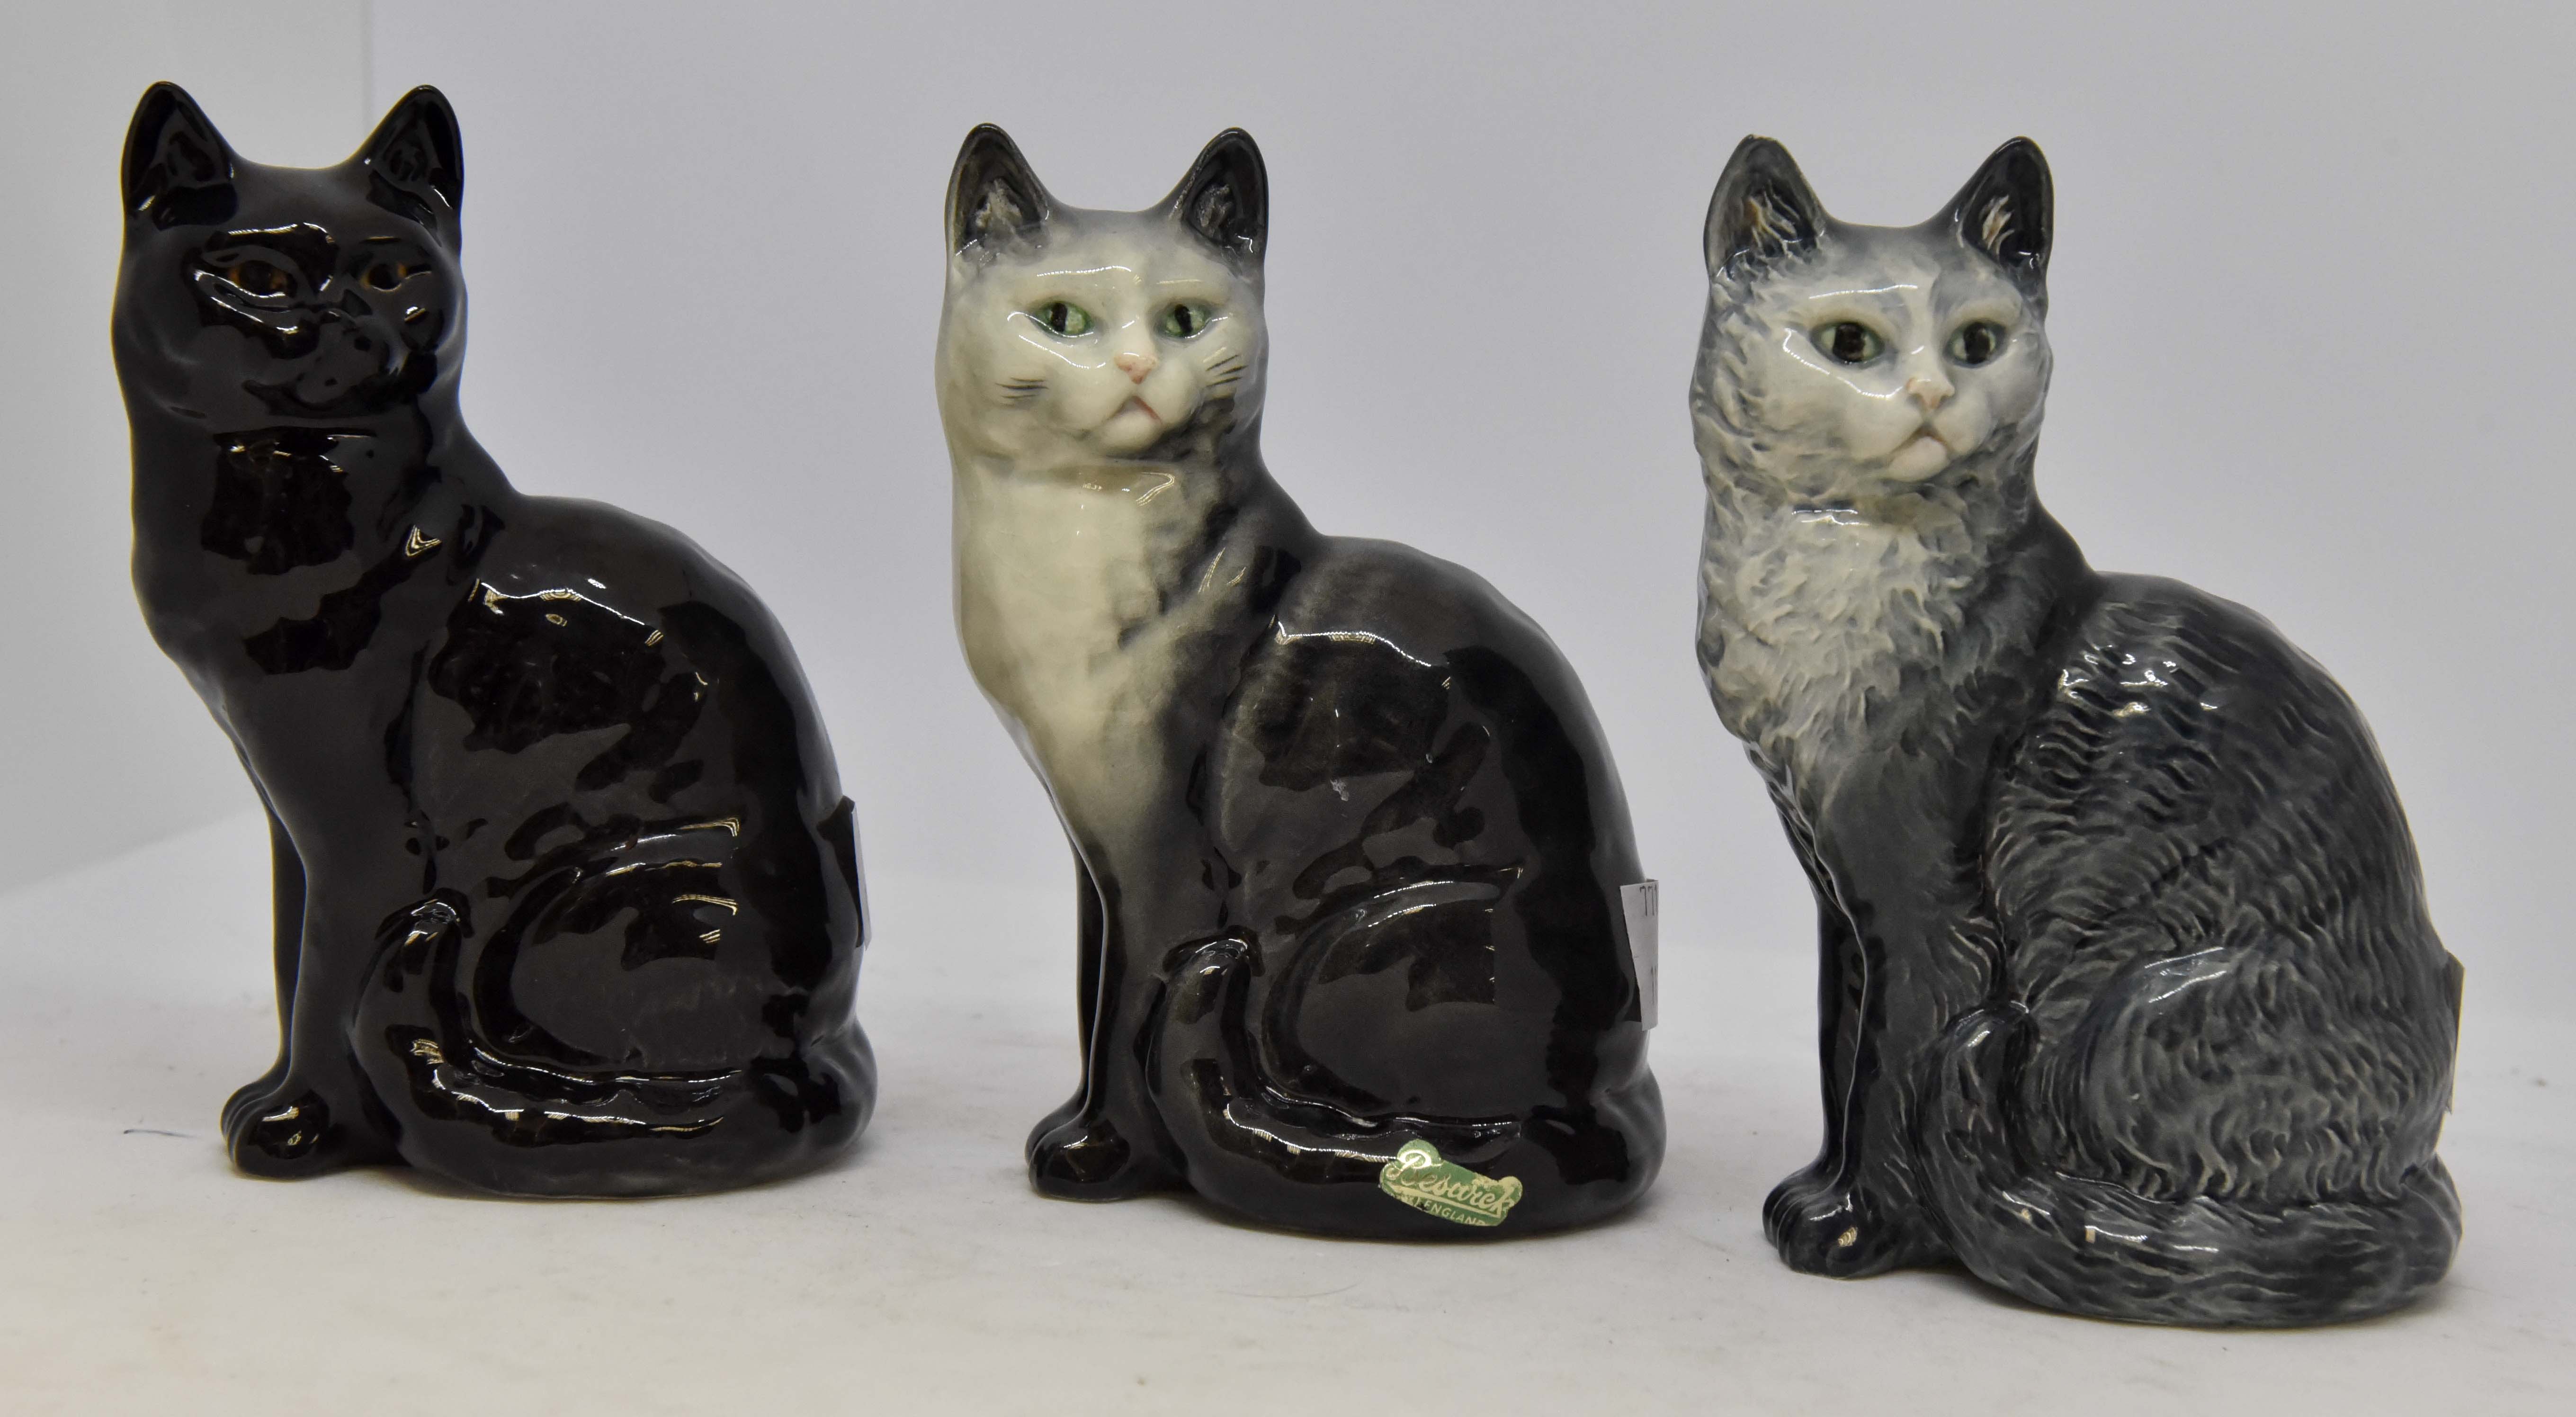 Beswick collection of cats 1031, seated and head looking forward, grey shaded, grey smoky blue,